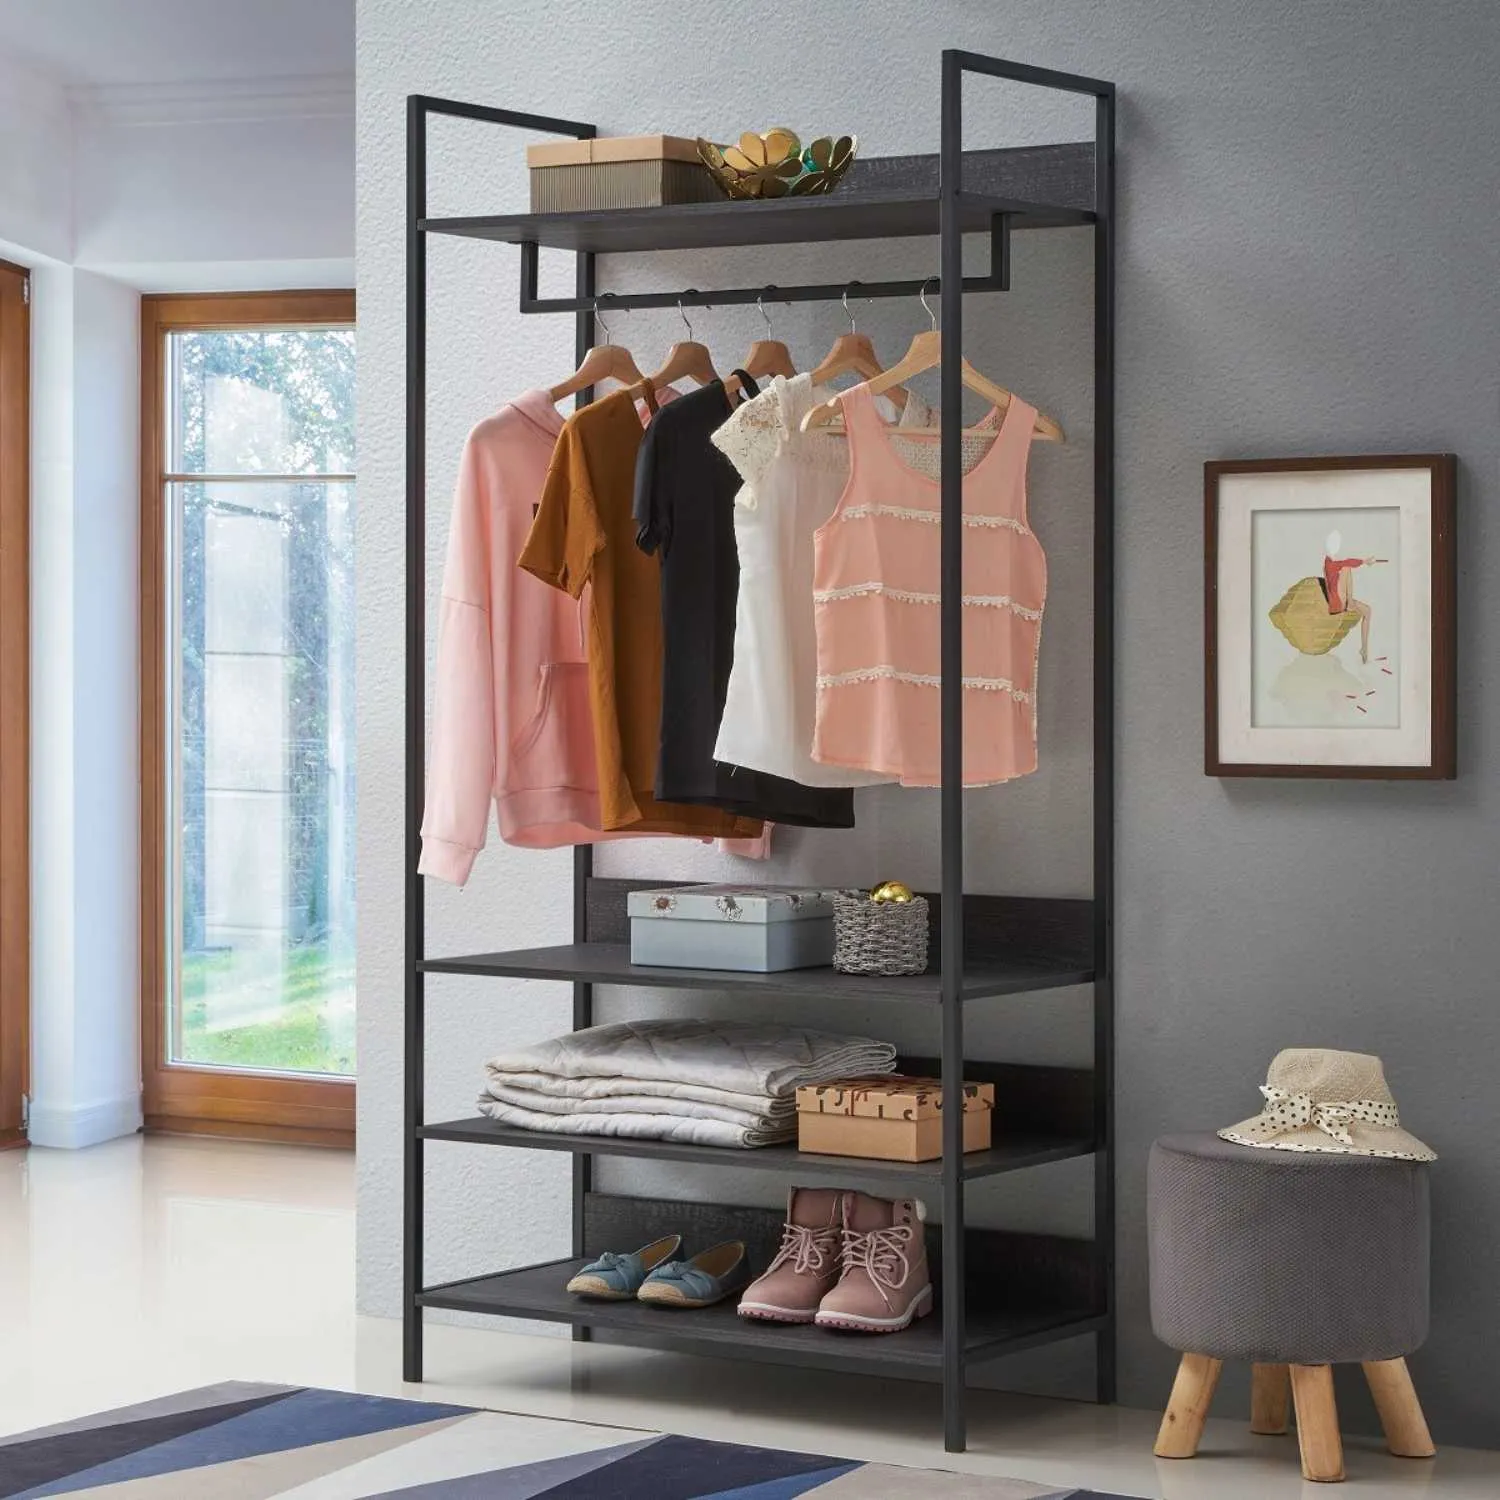 Black Finish Tall Open Wardrobe Shelving Unit Metal Outer Framed With 4 Shelves